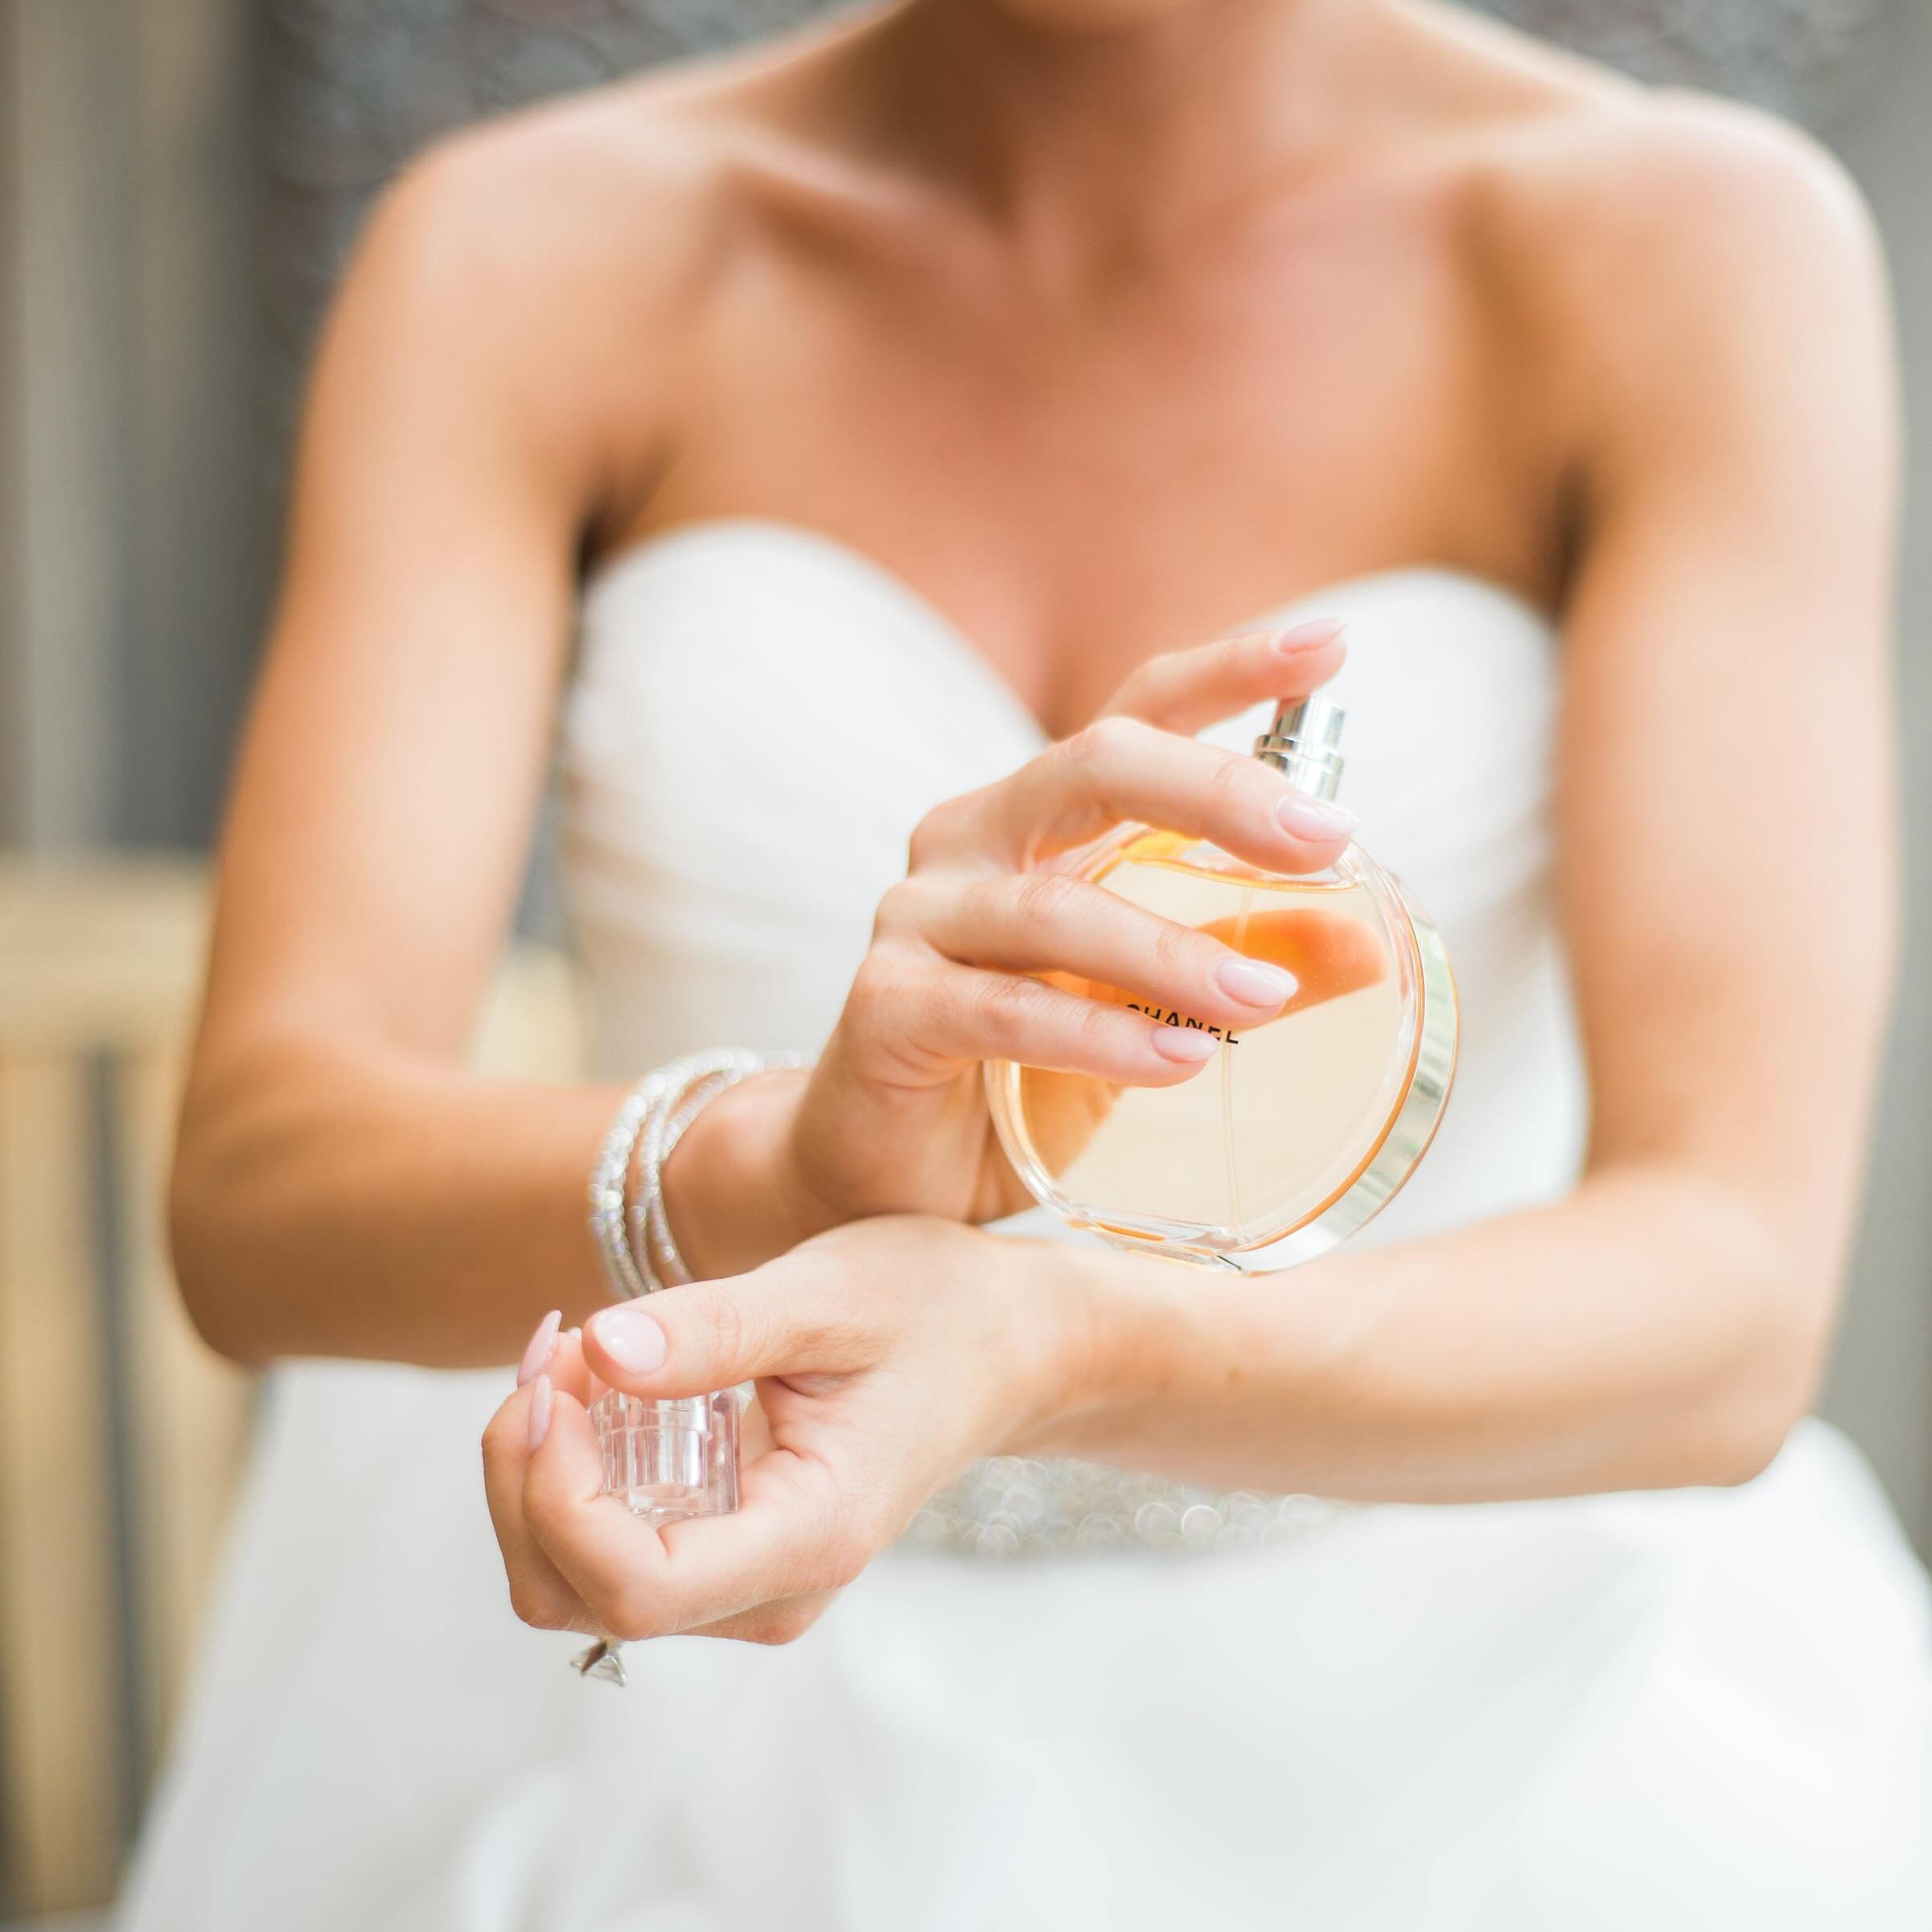 Capturing that last, intimate moment before she says &lsquo;I do&rsquo; 💍✨. Every spritz of perfume, a promise of forever. Brides-to-be, what scent will accompany you down the aisle? Leave a comment or send a direct message to share your wedding day